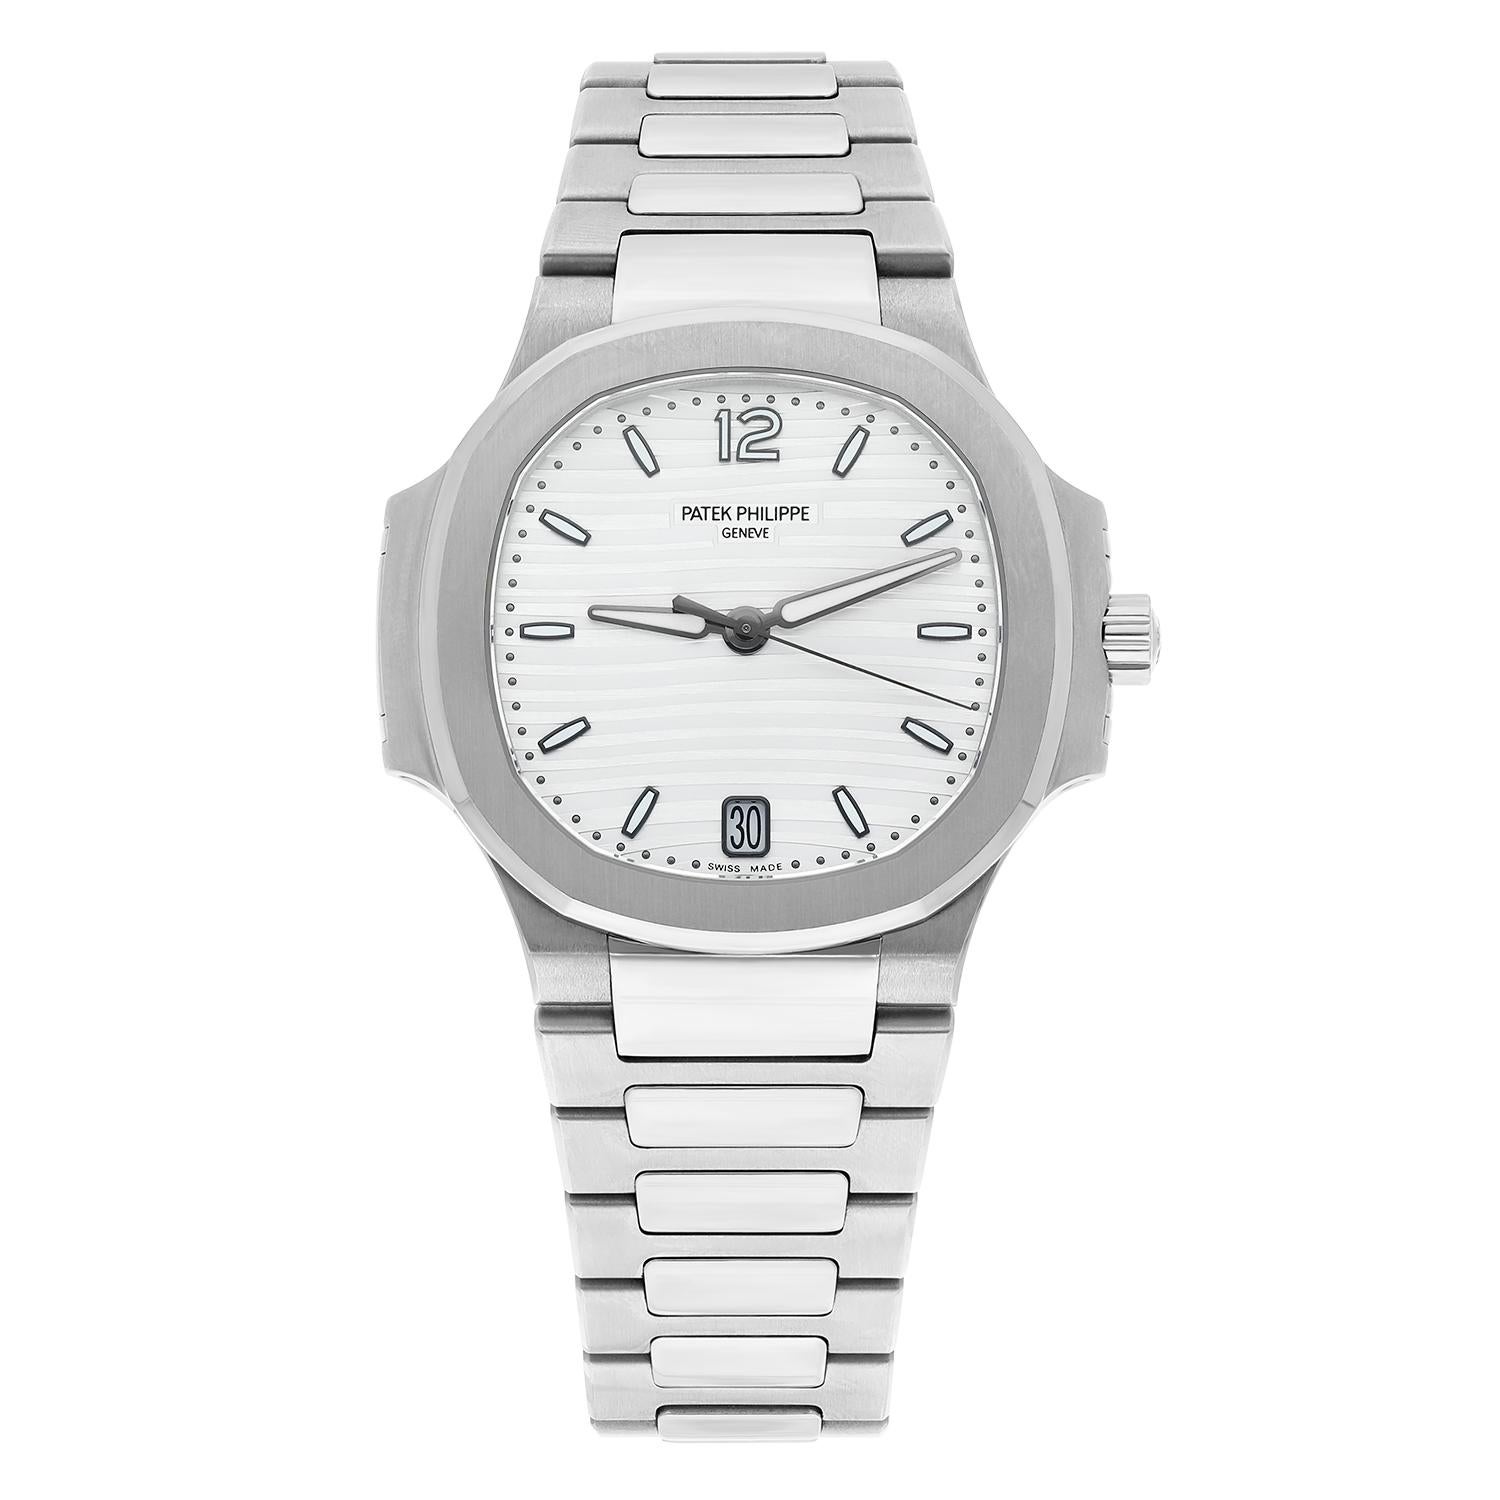 The Ladies Automatic Nautilus wristwatch in stainless steel emphasizes its casual elegance and very feminine style with this silvery opaline dial.. The gently undulating embossed decor underscores its unmistakably ladylike interpretation of the